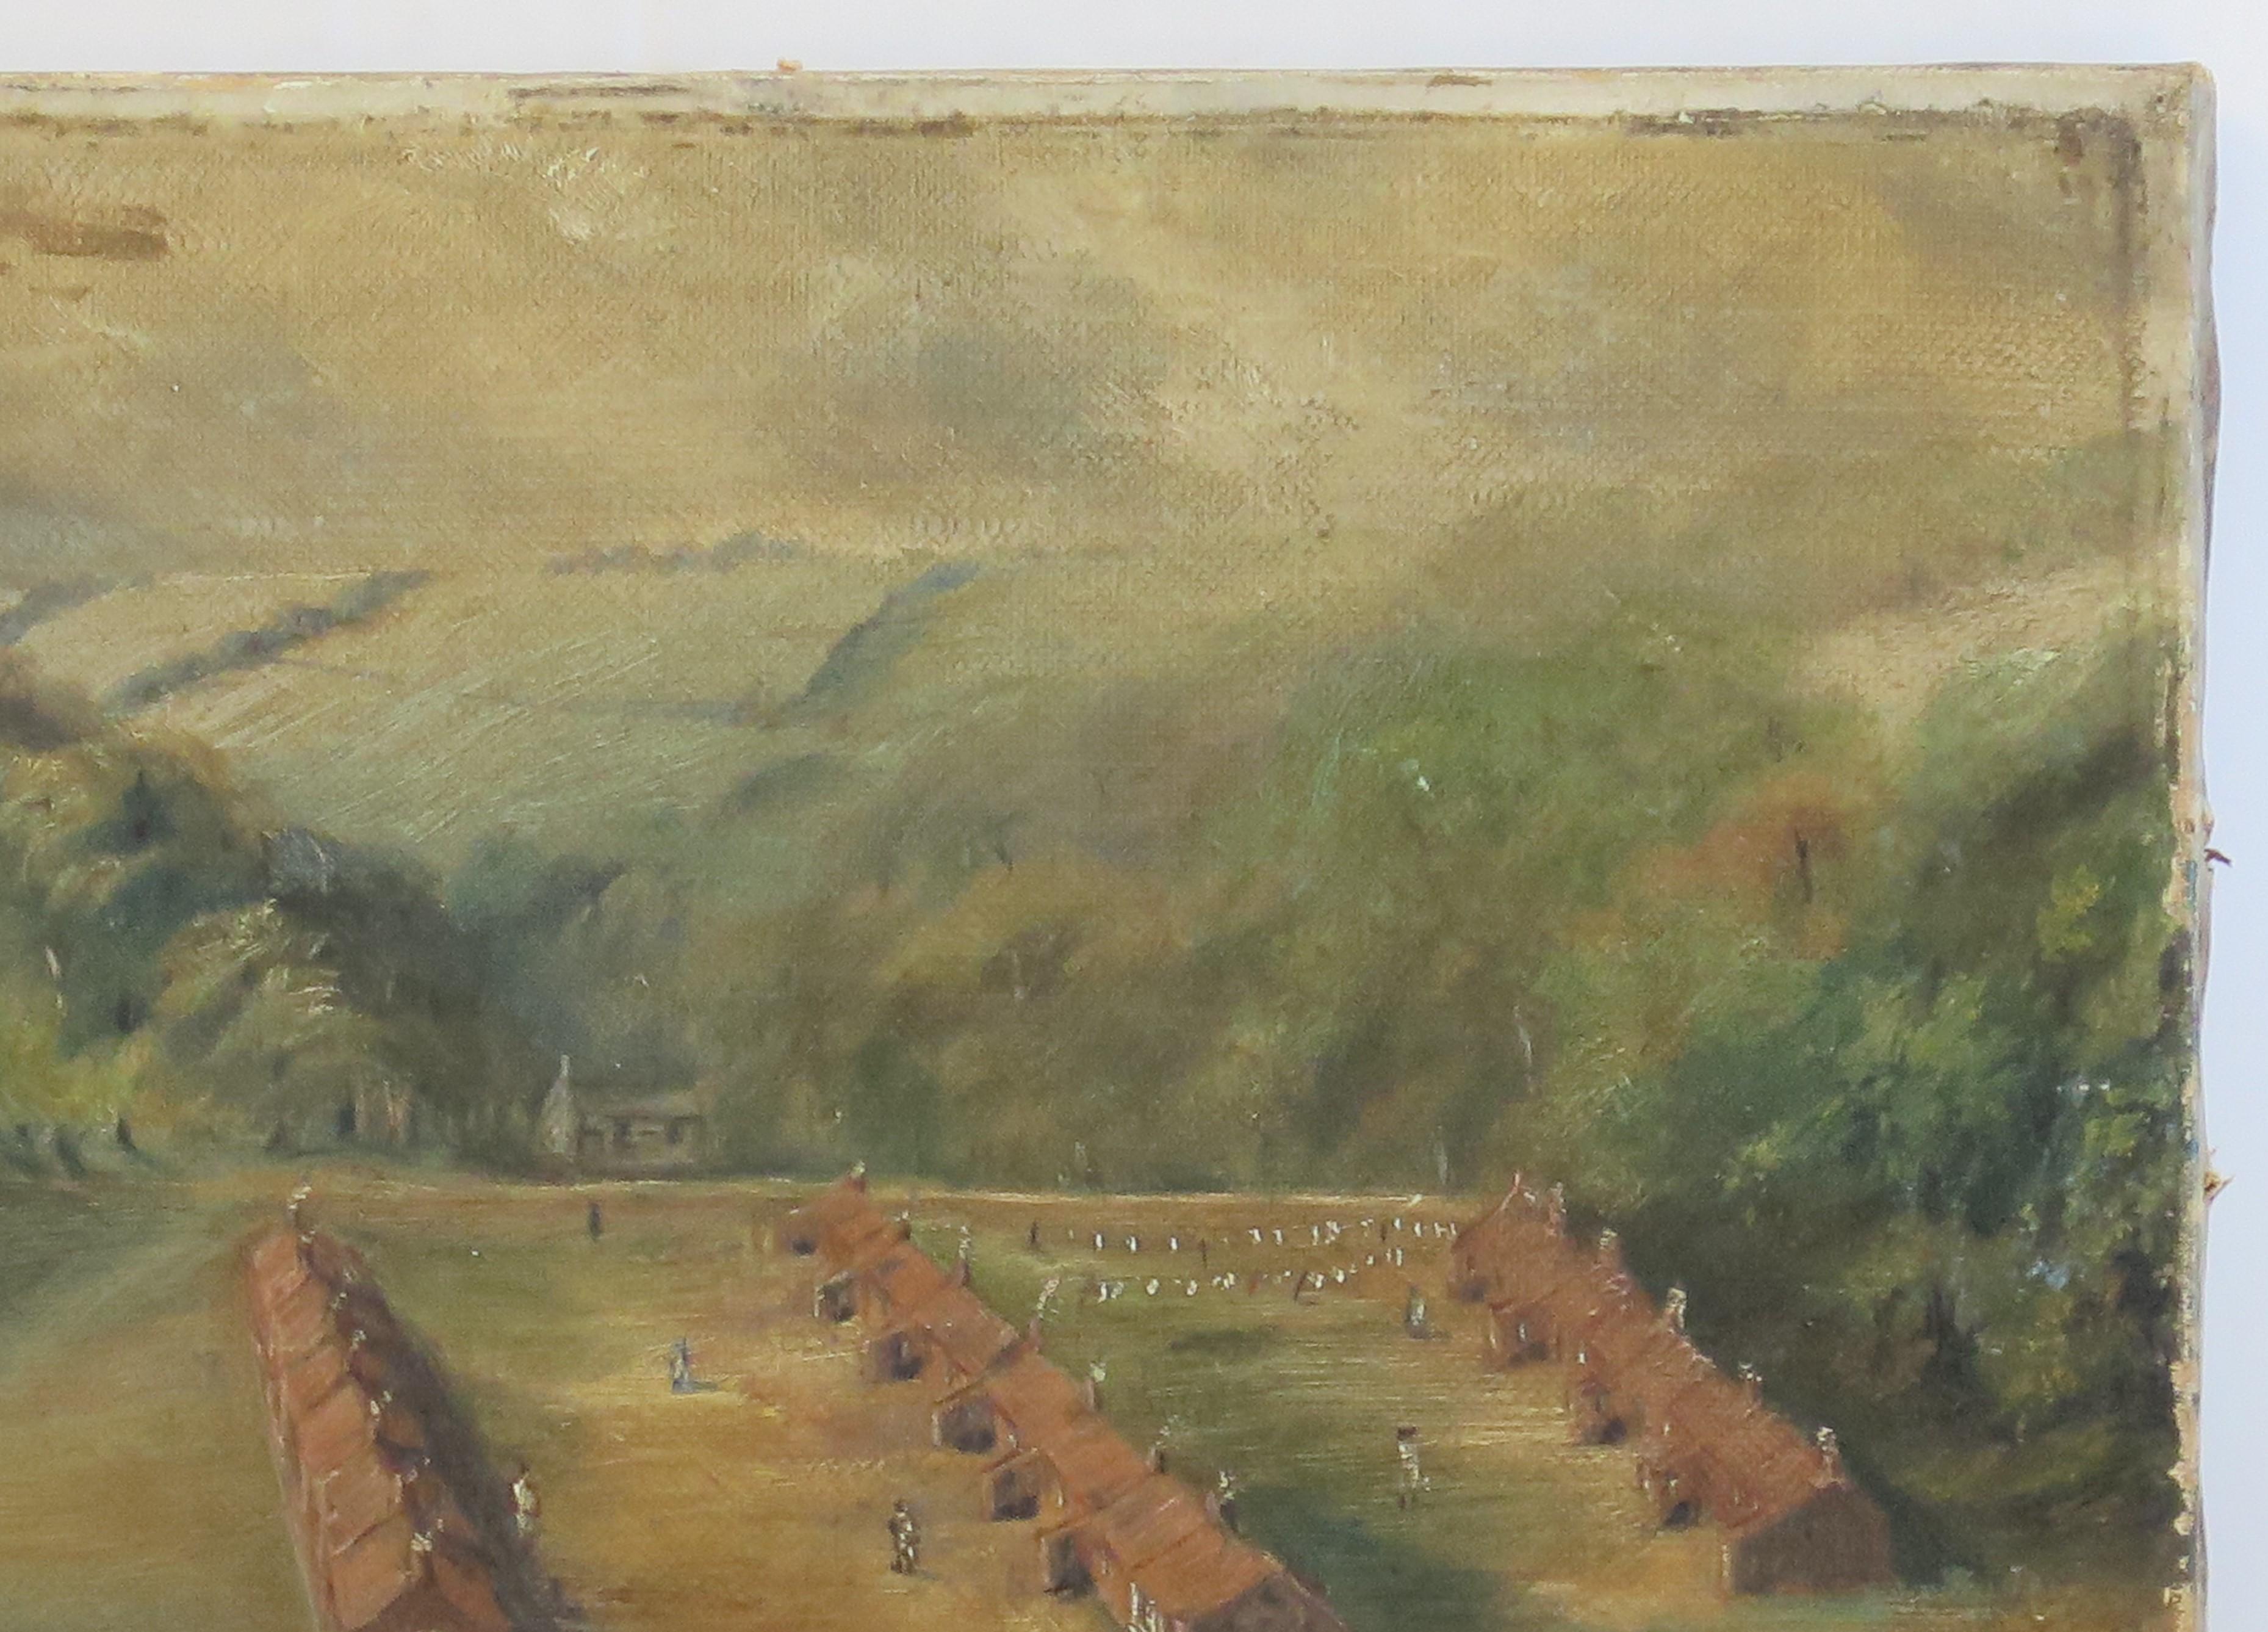 Hand-Painted Original Small Oil Painting on canvas Colonial Shanty Town Landscape, 19th C. For Sale